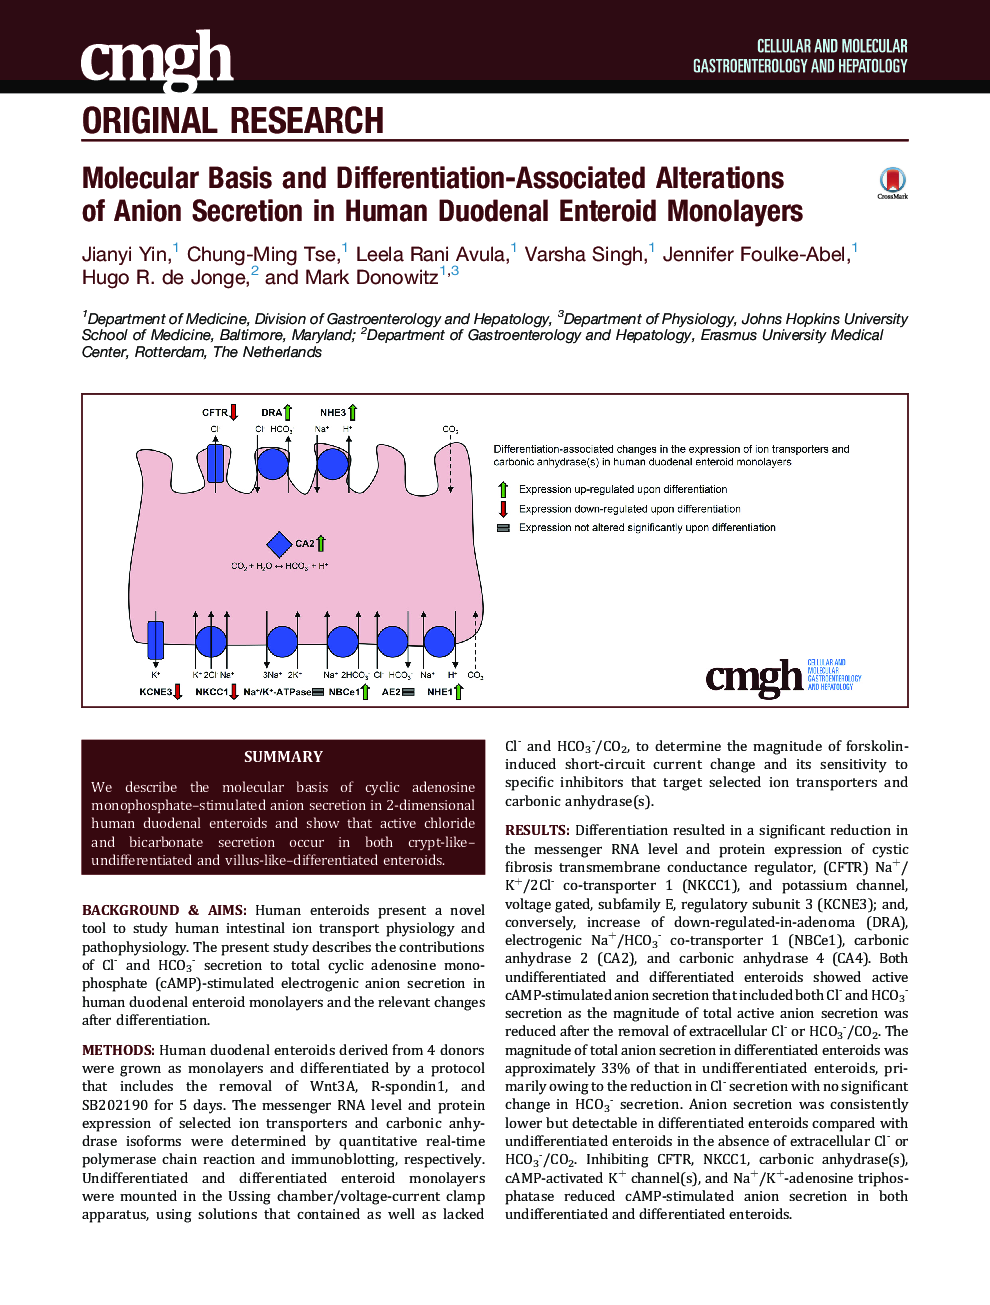 Molecular Basis and Differentiation-Associated Alterations of Anion Secretion in Human Duodenal Enteroid Monolayers